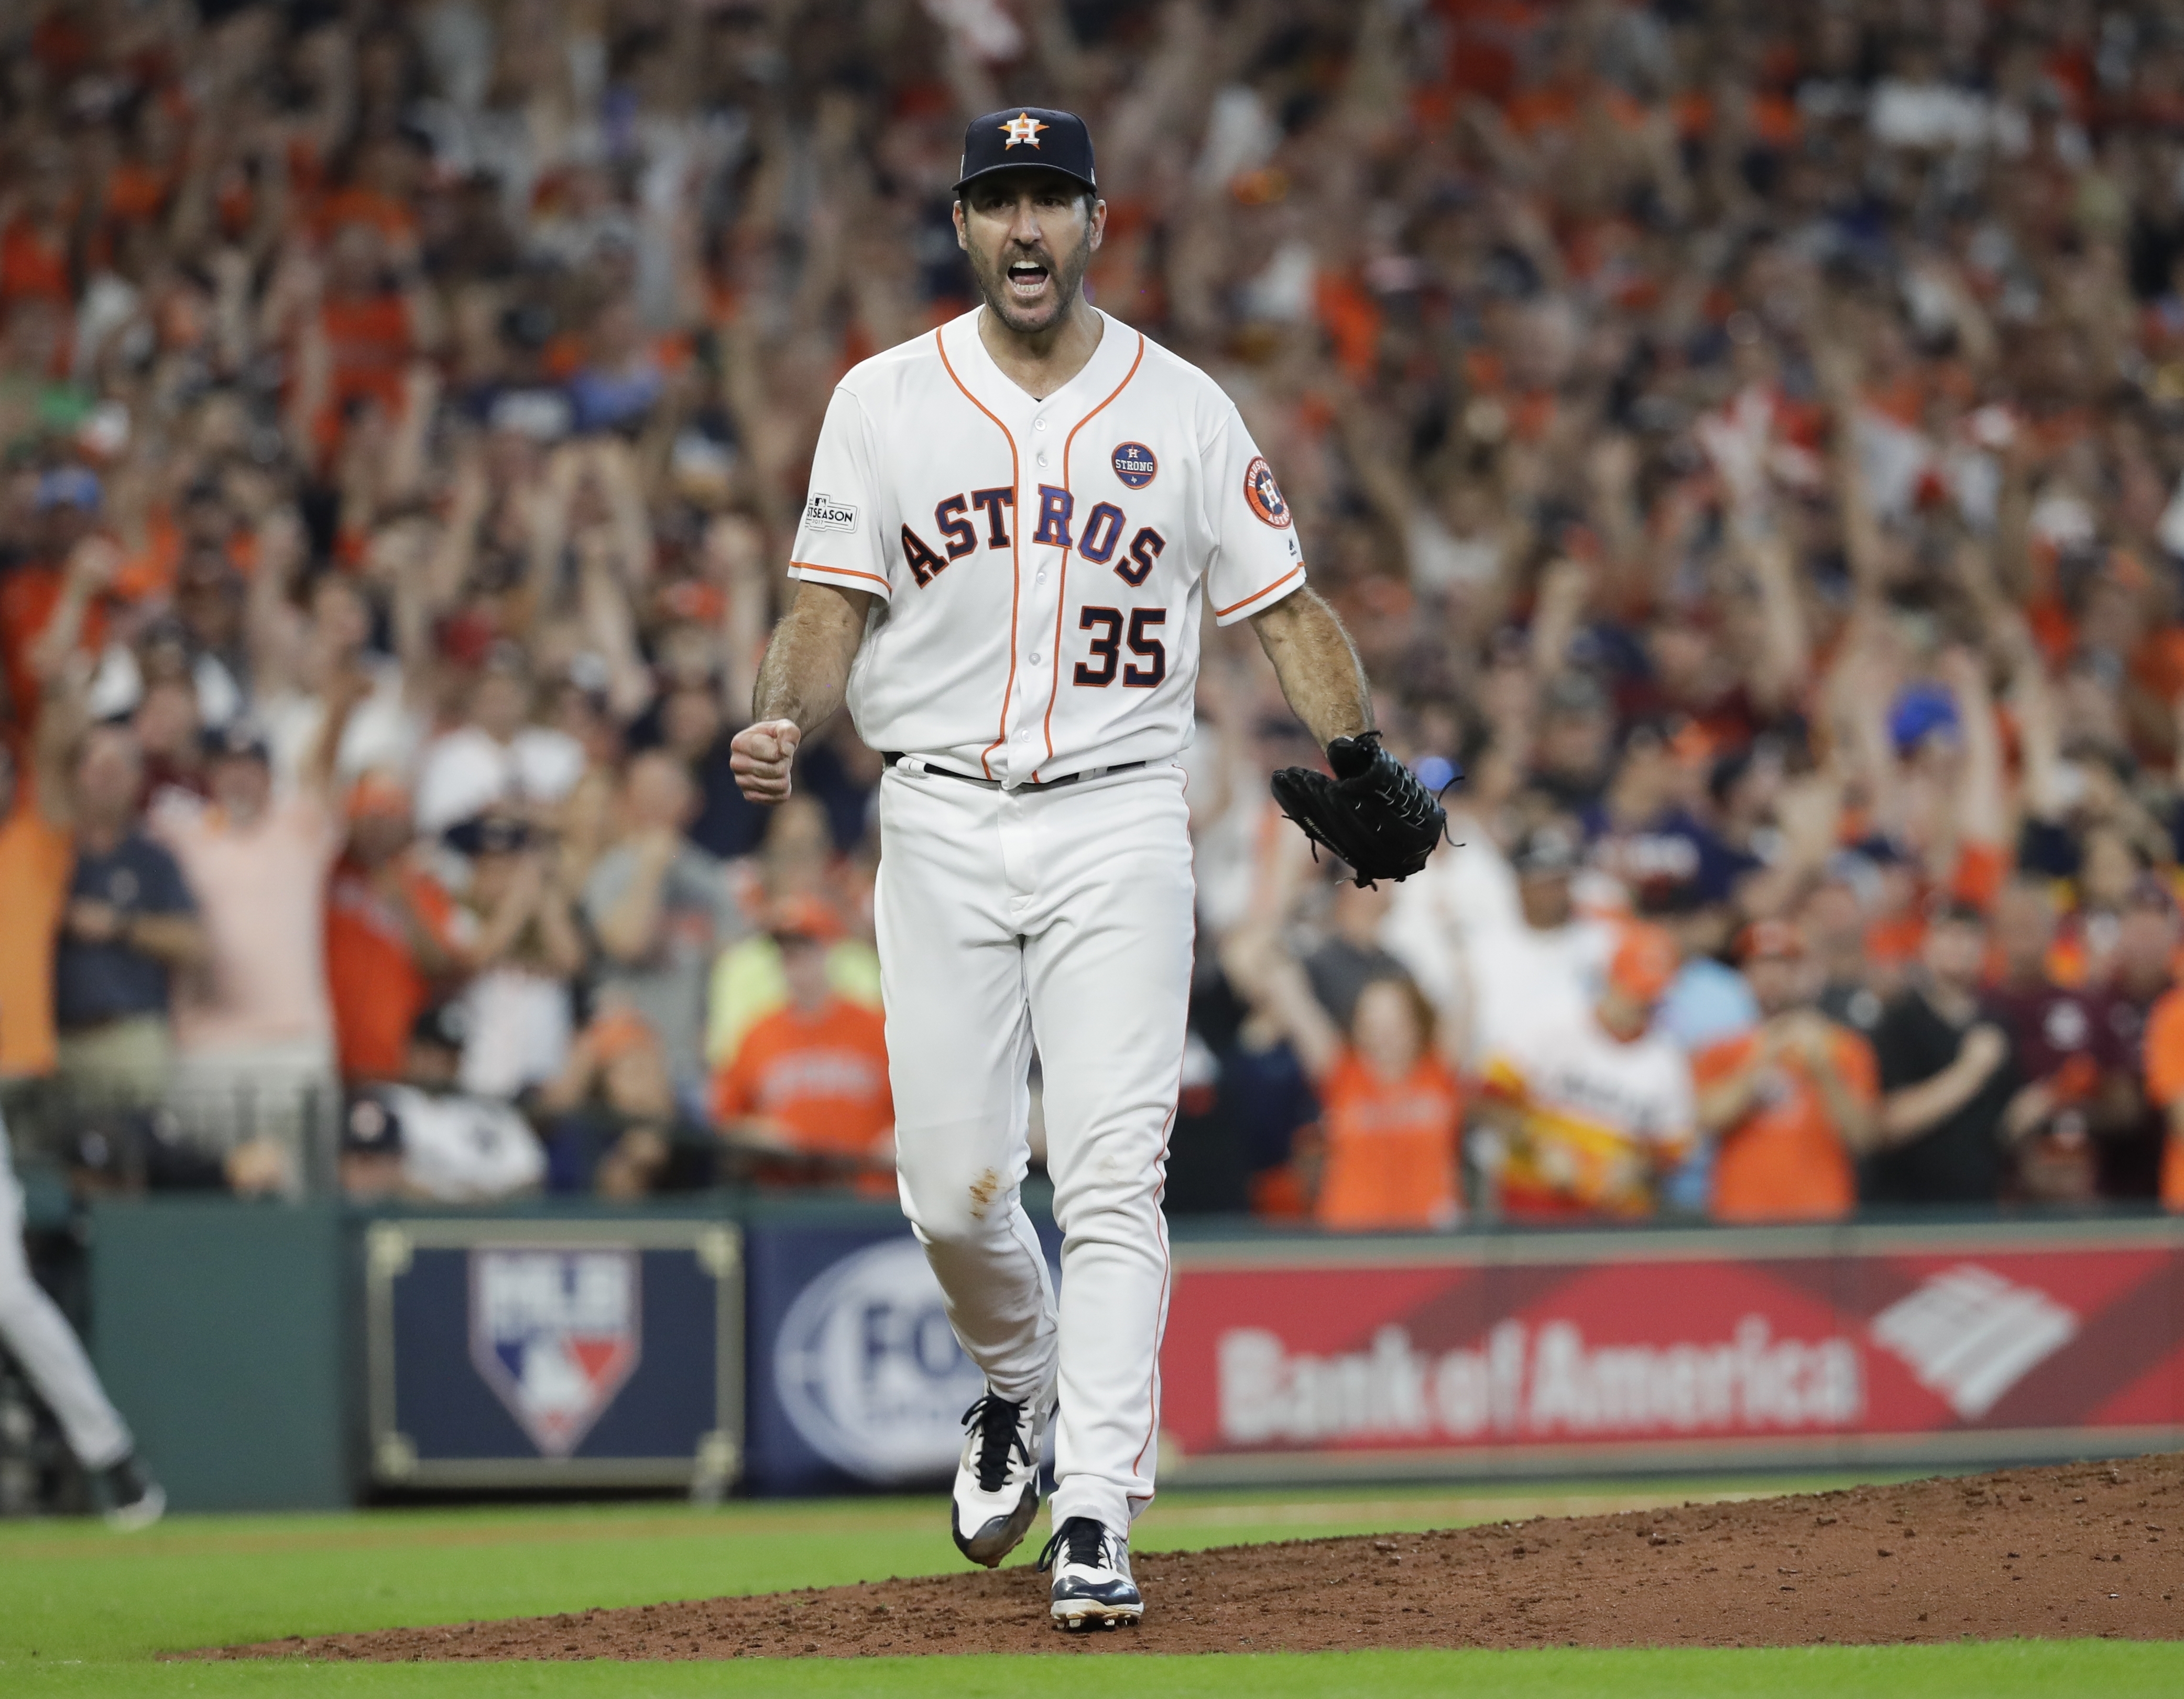 Justin Verlander and Astros? A reunion makes too much sense.